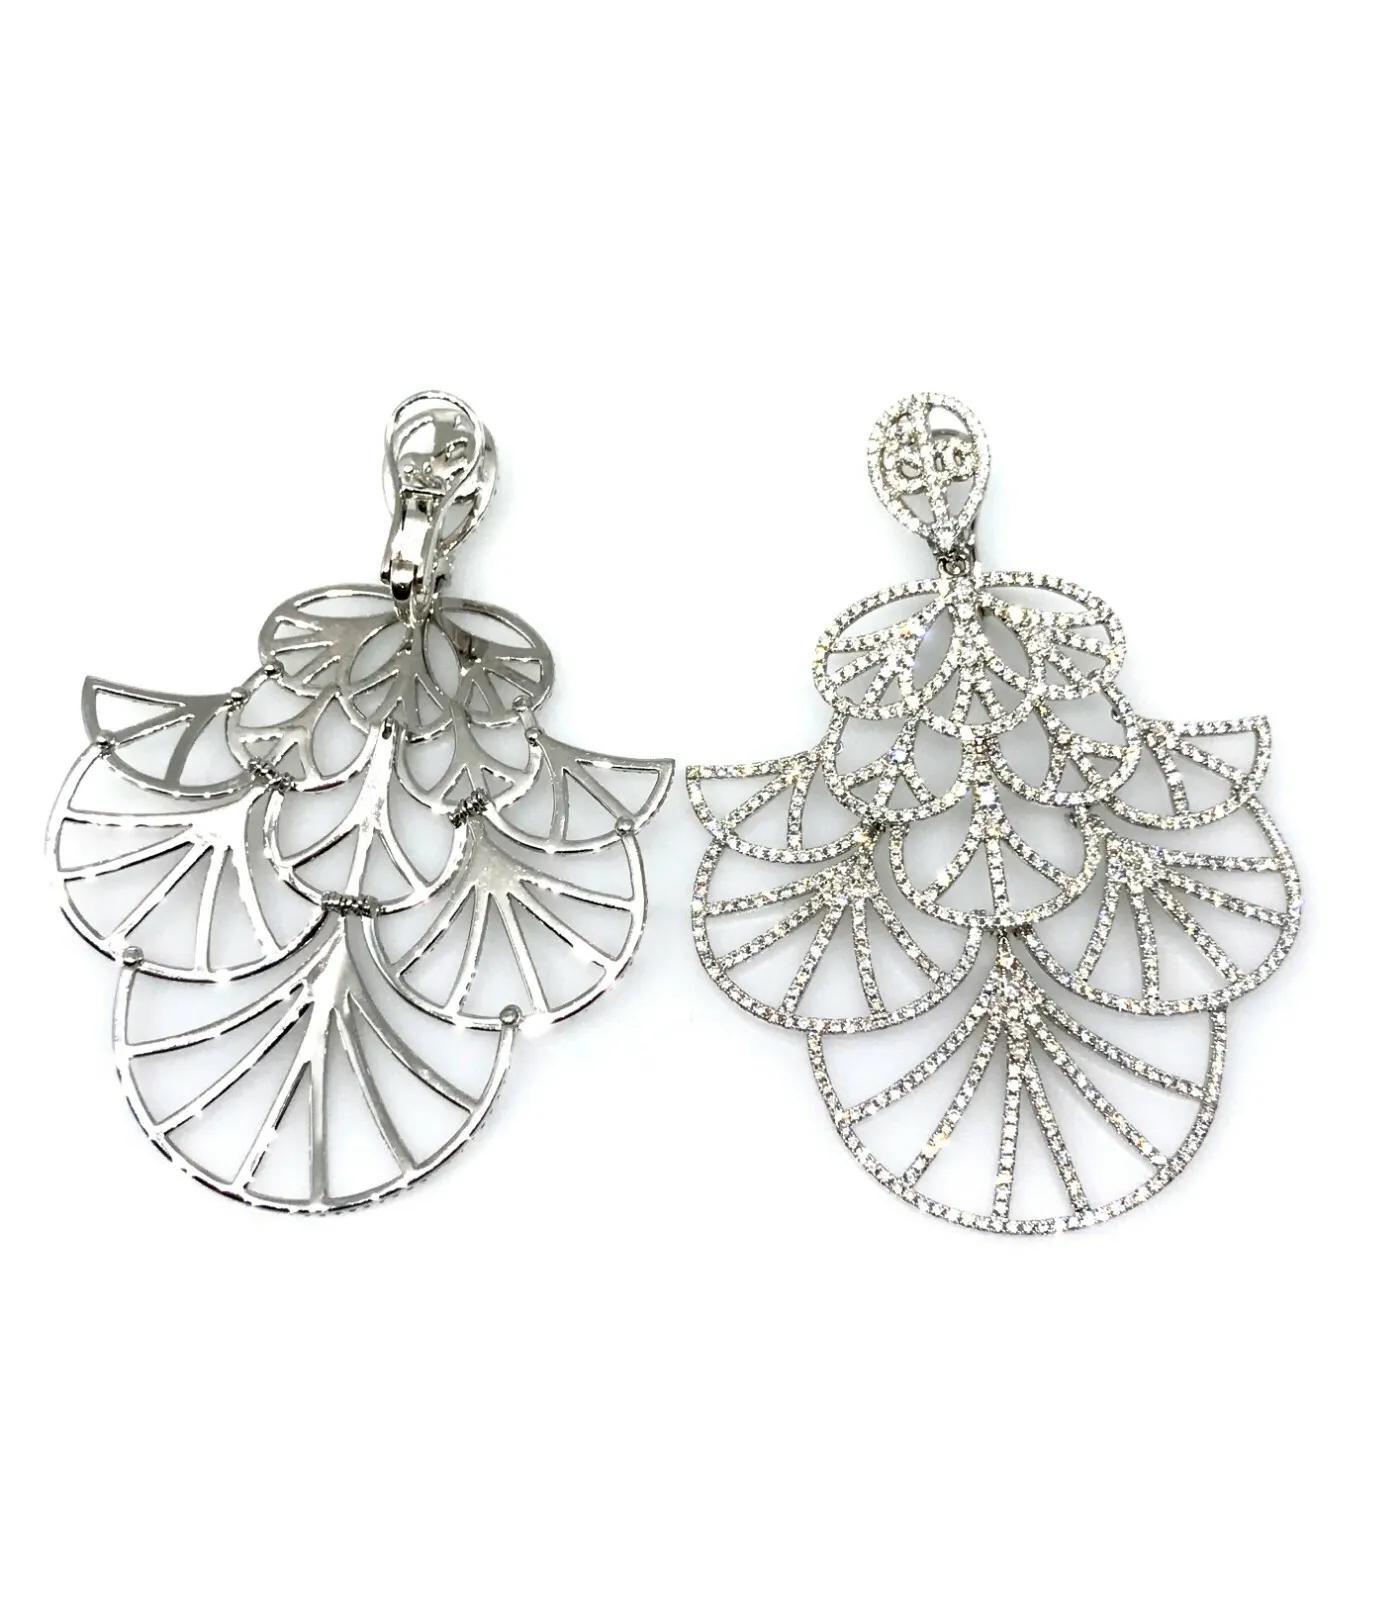 Round Cut Large Diamond Fan Chandelier Earrings 9.50 Carats Total Weight in 18k White Gold For Sale